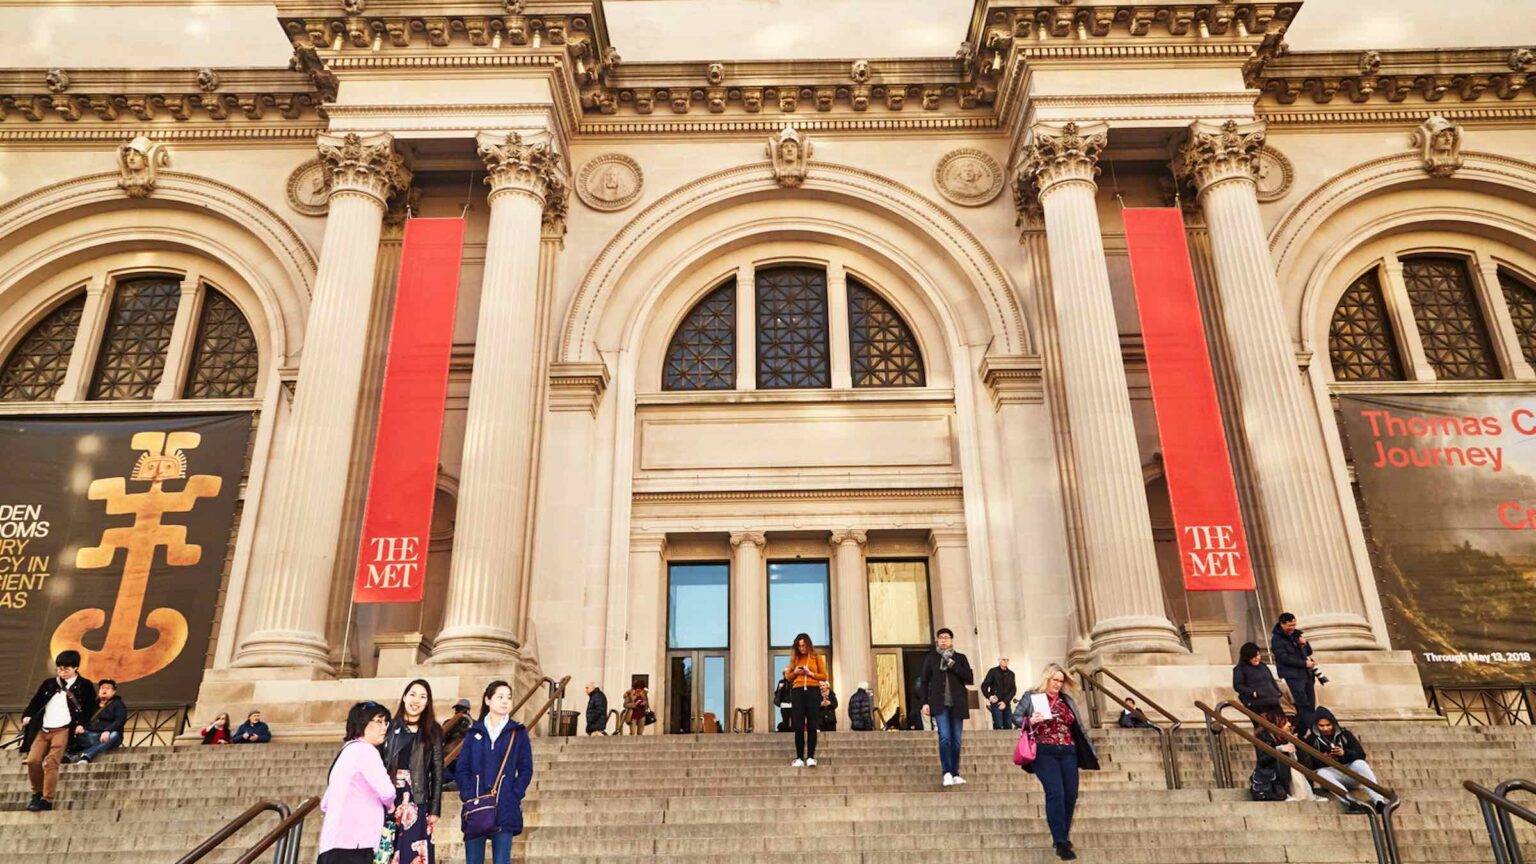 The Met is one of NYC’s most iconic attractions. Yet, an Instagram post has caused visitors to endlessly search for this statue of Rihanna. Where is it?